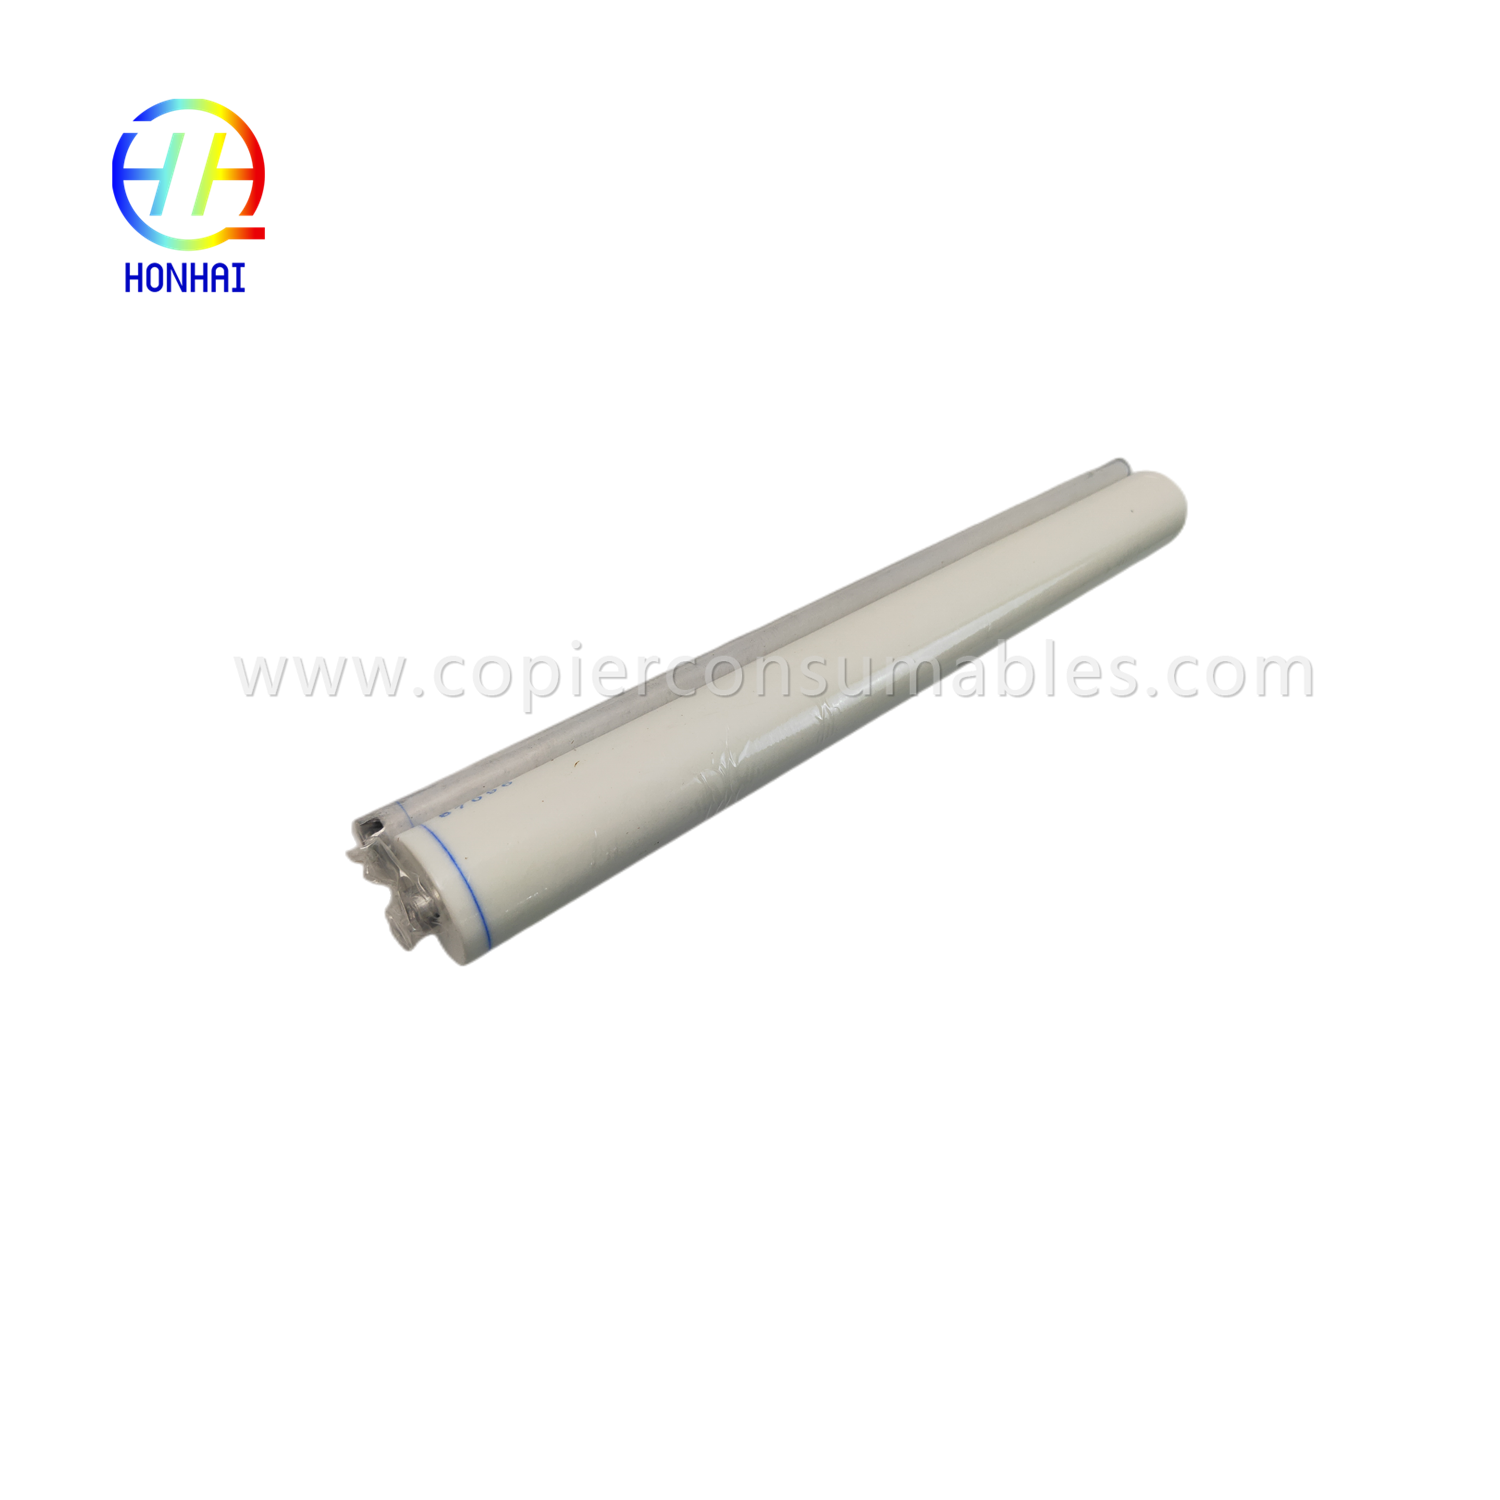 Canon IR6800 iR 8085 8095 8105 8205 8285 8295 FQ-009 FC5-2286-000 OEM Fuser Cleaning Fuser Roller සඳහා Fuser Cleaning Web